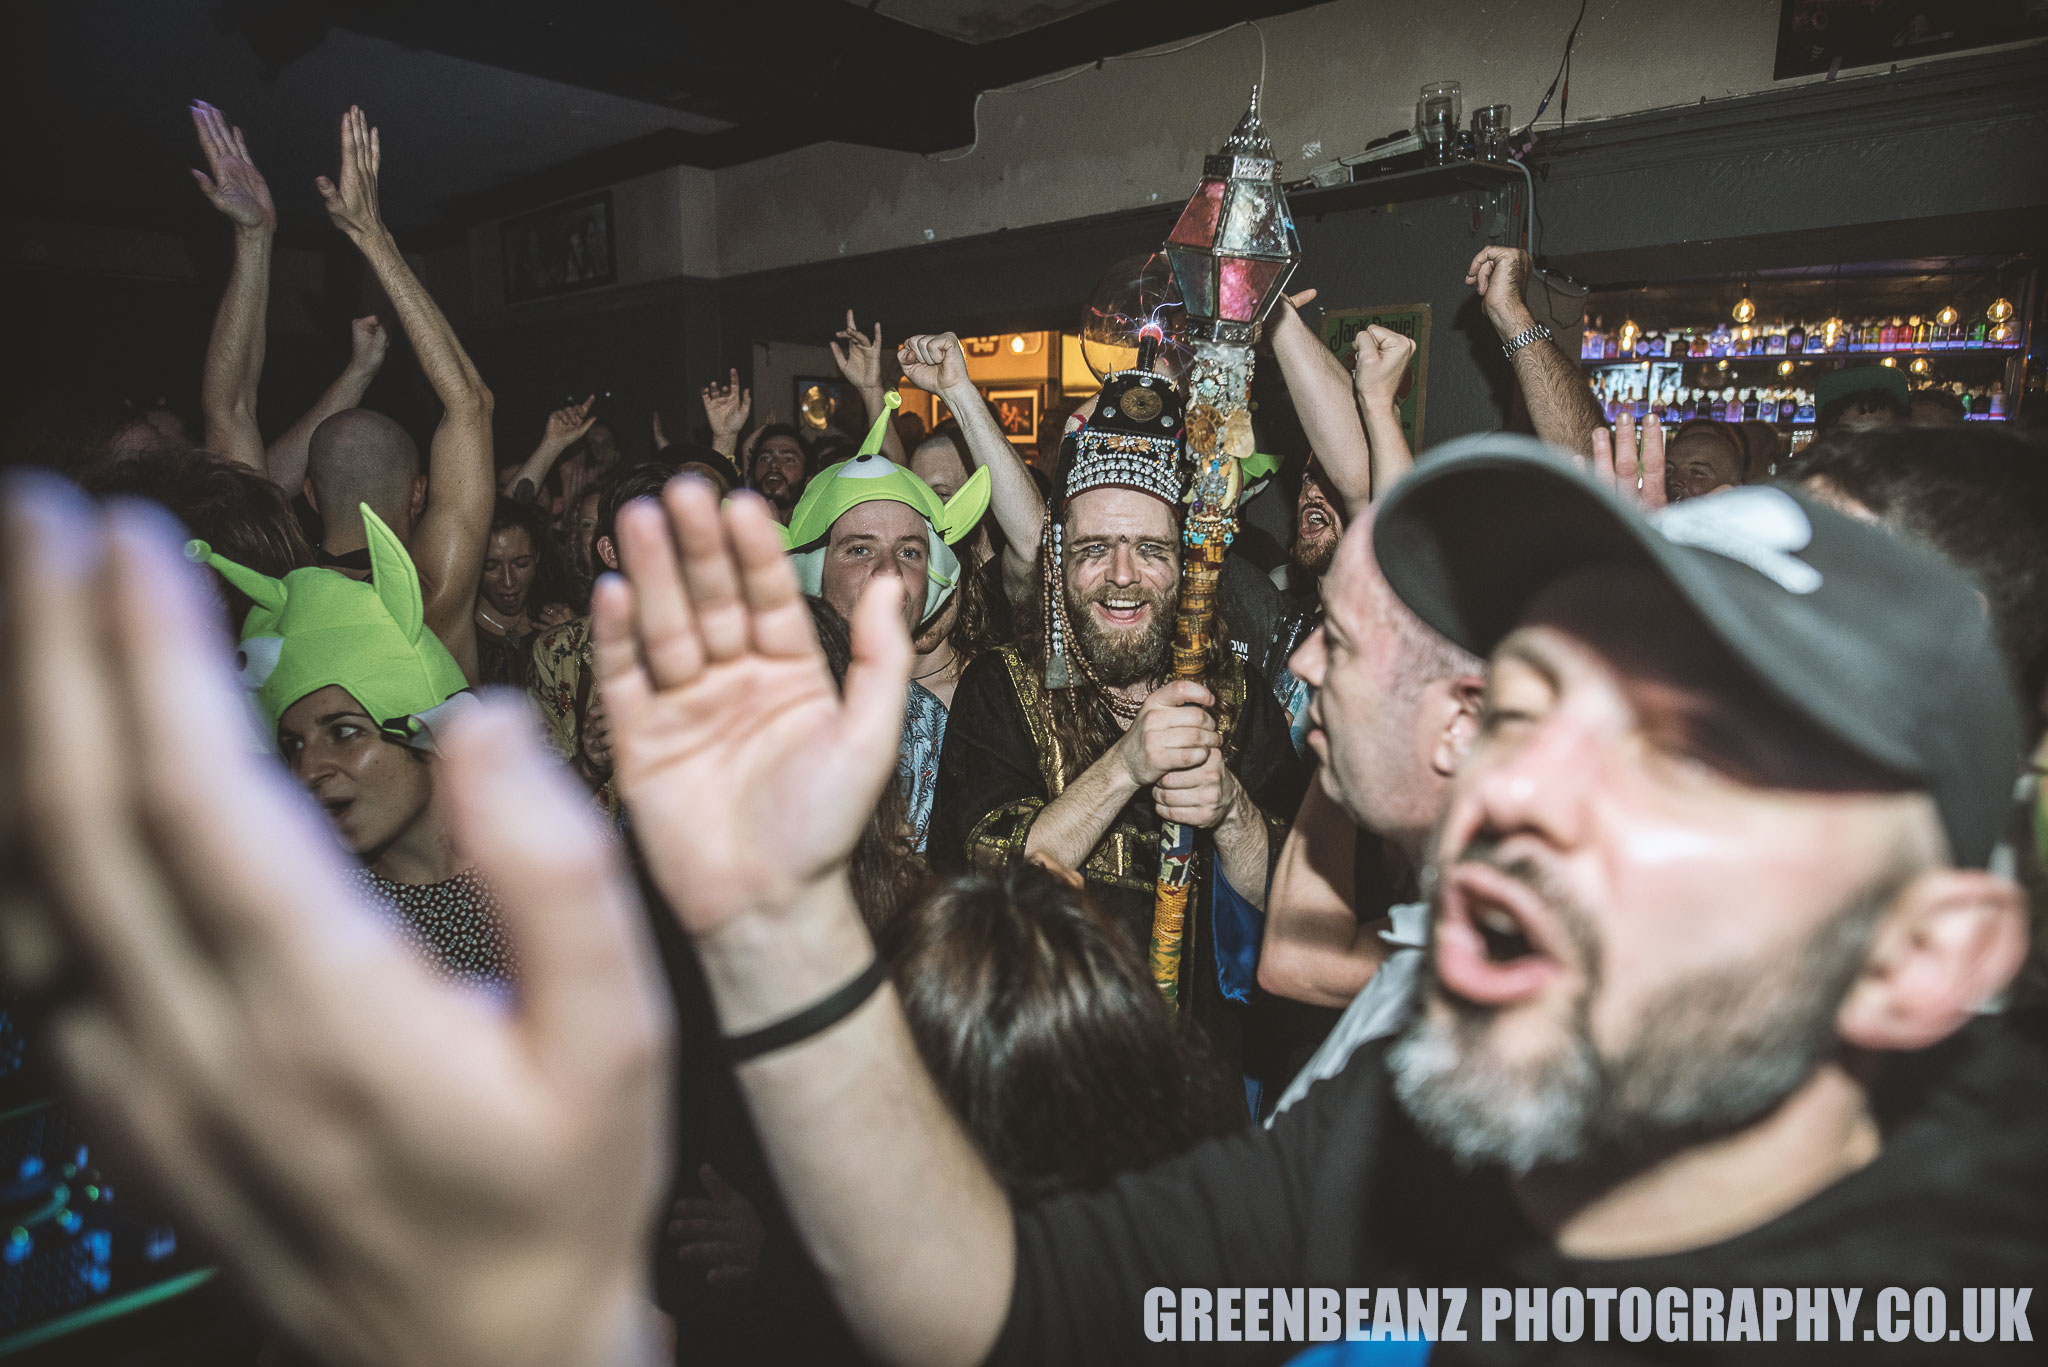 HENGE's 'Explorer/Jester' Zpor with the fans at The Junction in Plymouth